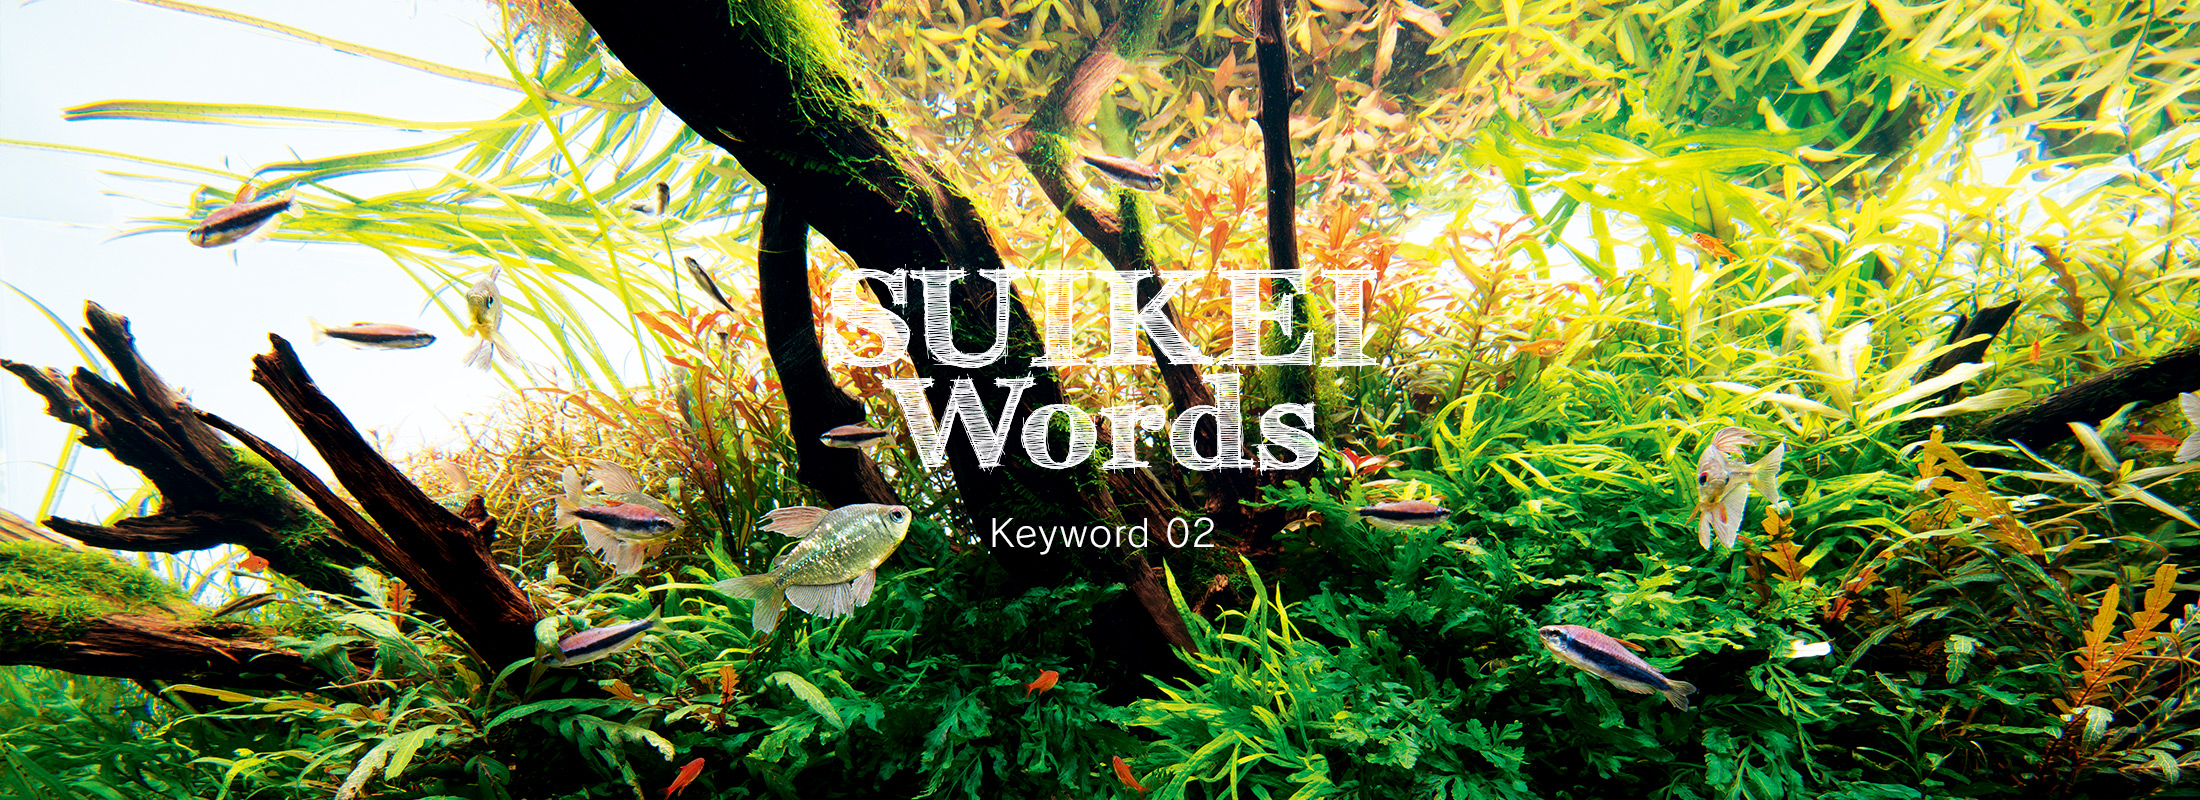 SUIKEI WORDS Keyword 02 ‘Layout composition – Driftwood’